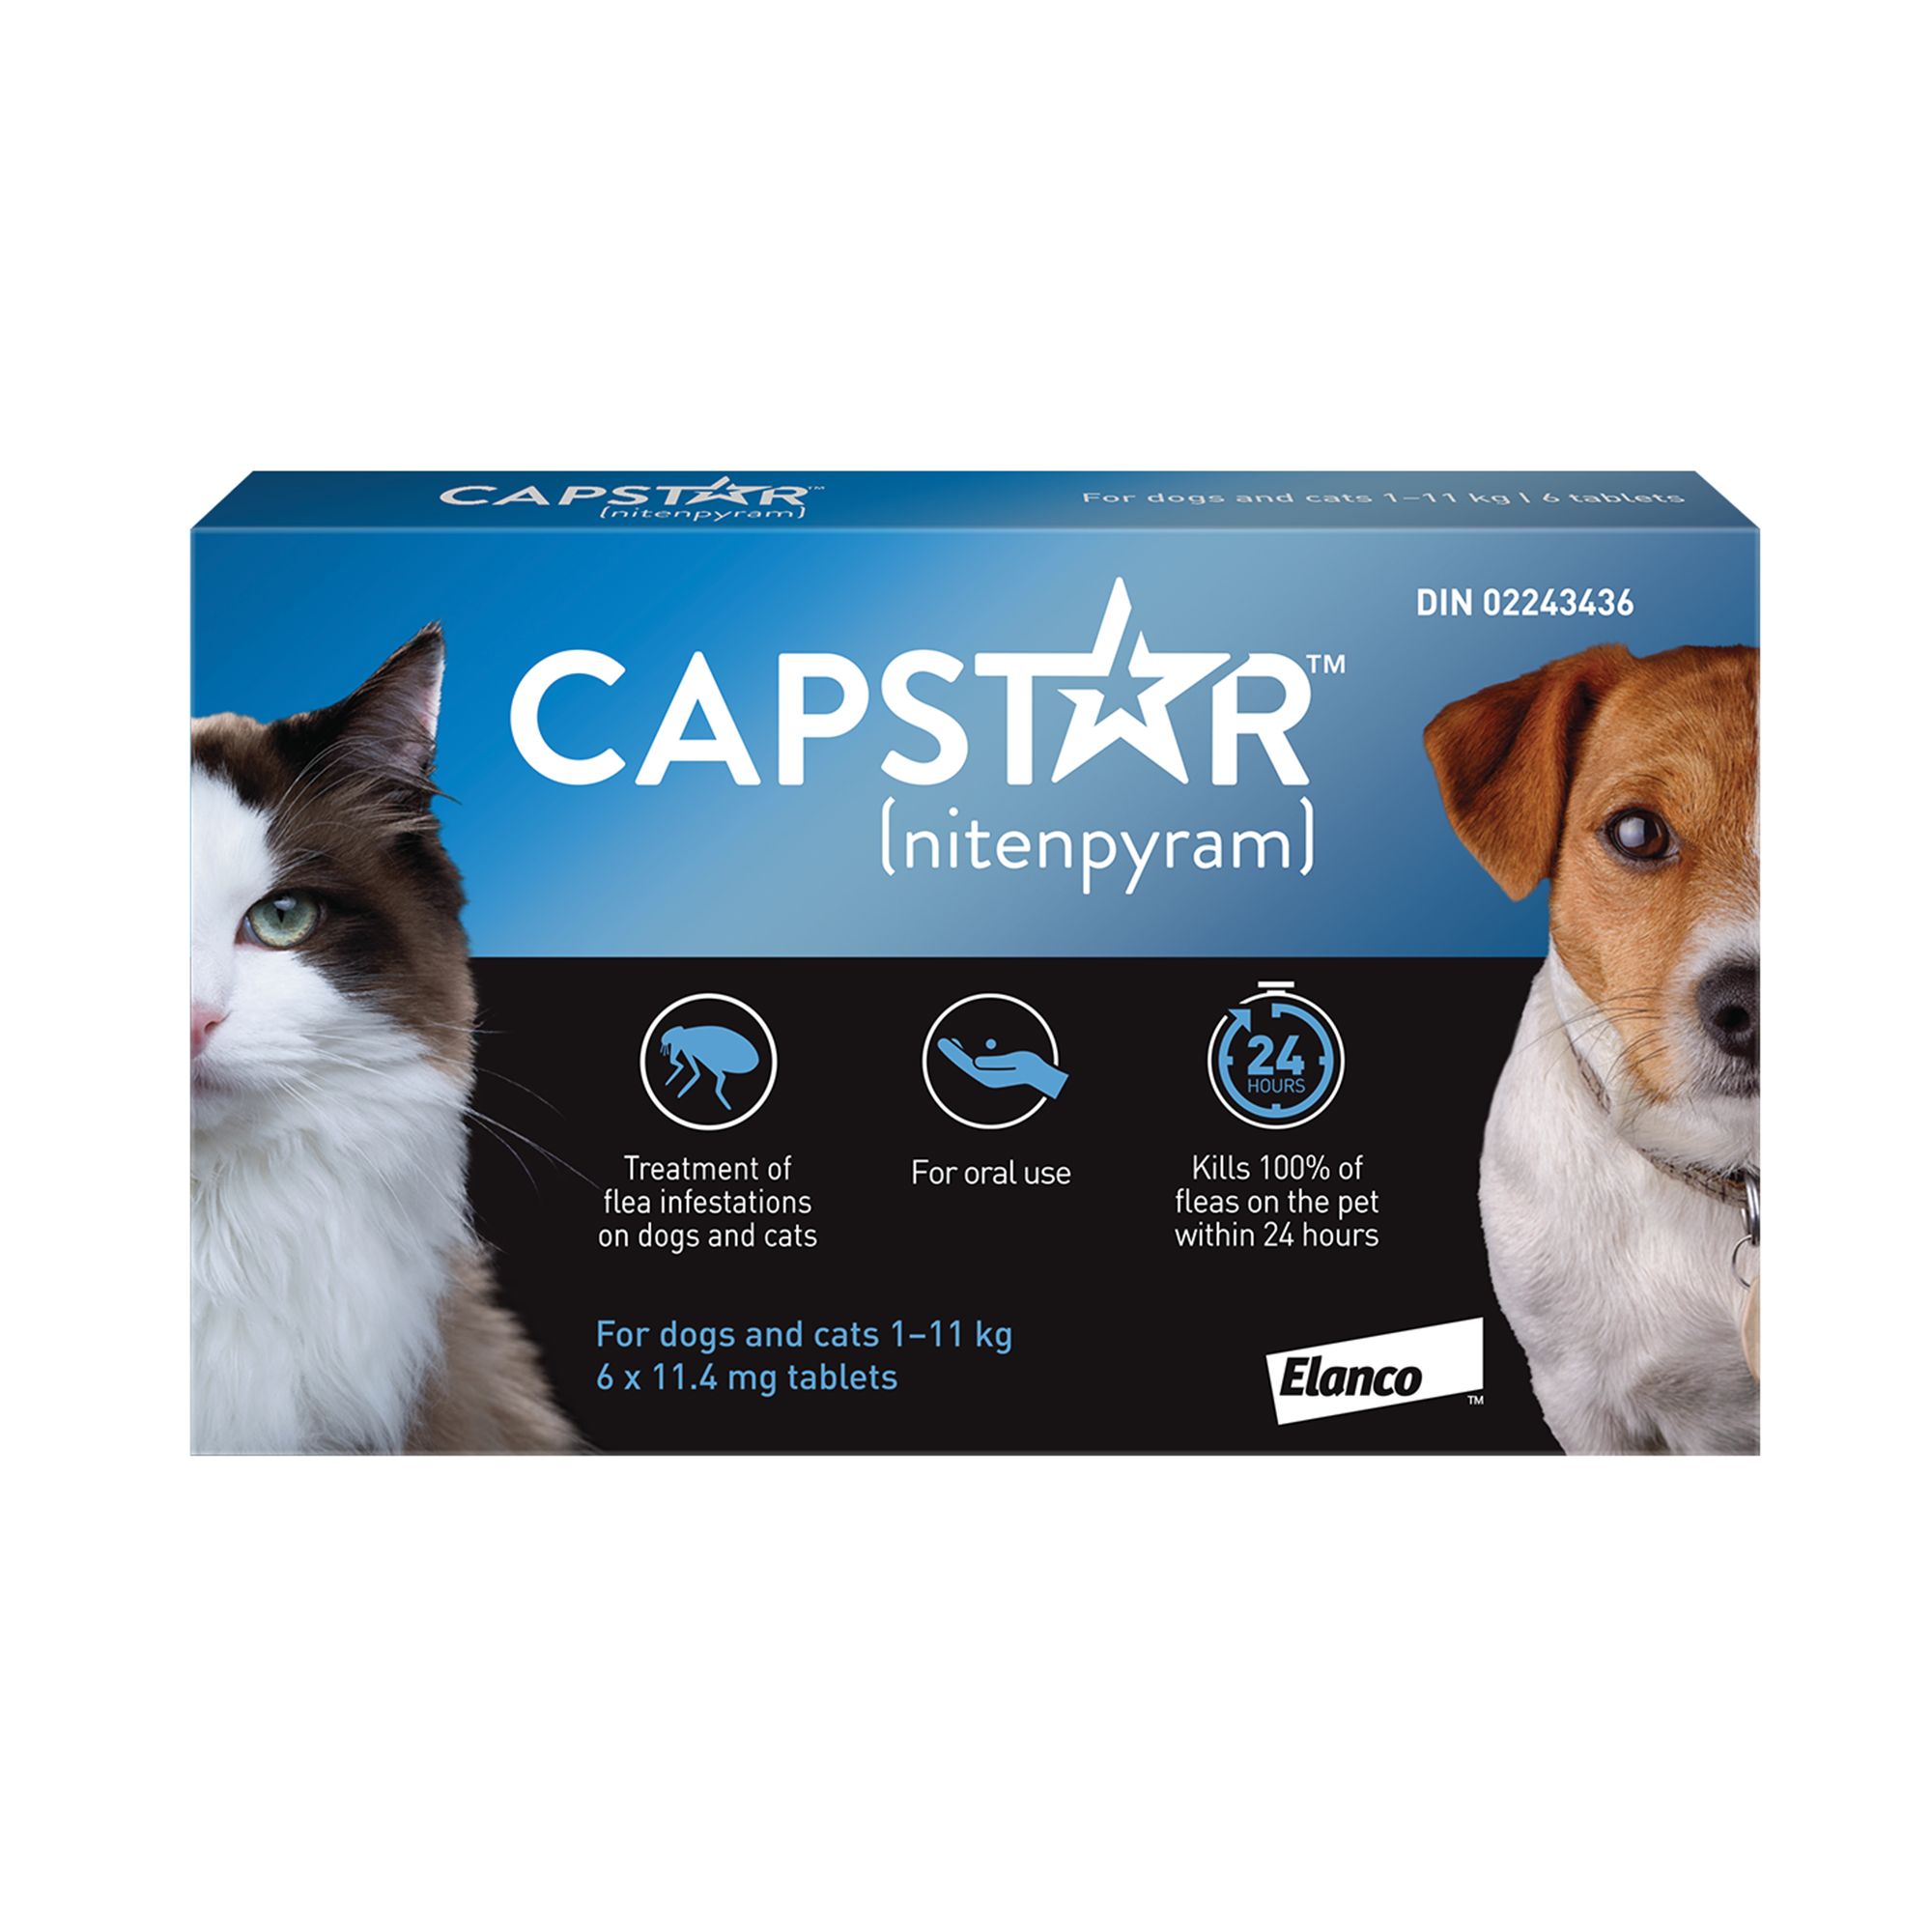 capstar for small dogs and cats